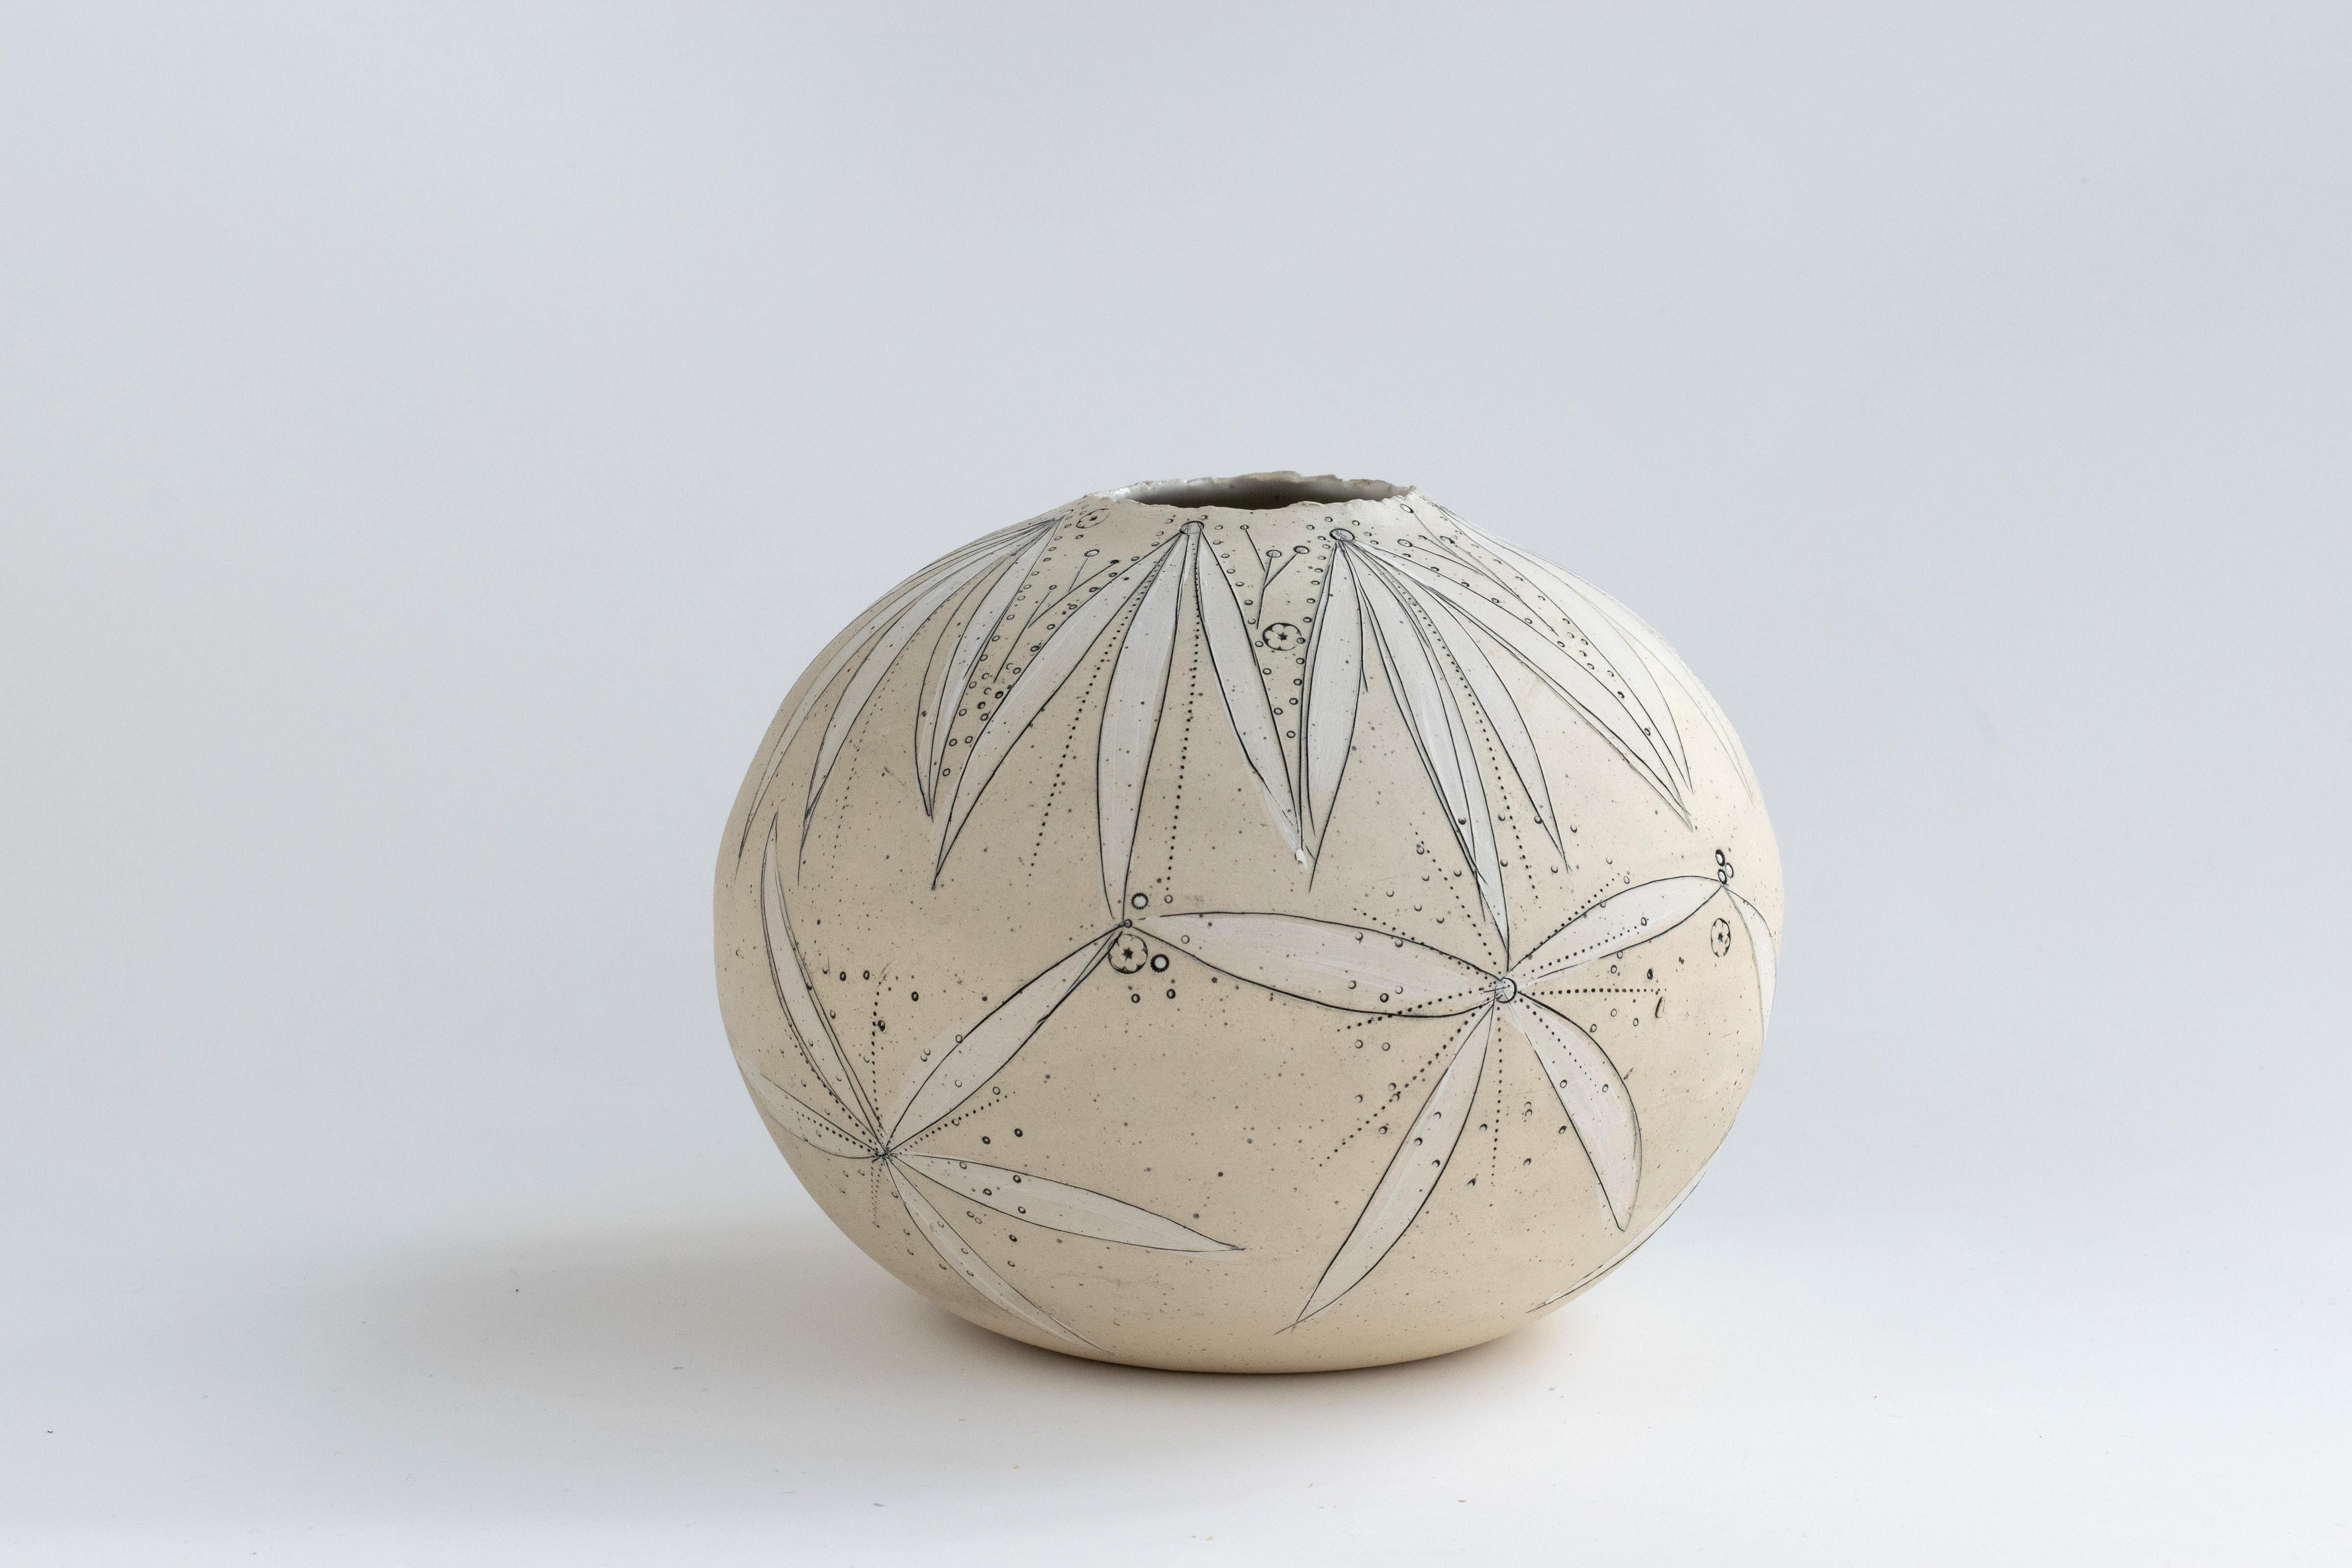 477 Handcrafted stoneware blossoming moon vase by Helen Prior.

A delicate handcrafted vase, organic in shape with a torn clay opening in natural speckled stoneware clay.
Part of the Cross Pollination Series- the stylizing and abstraction of